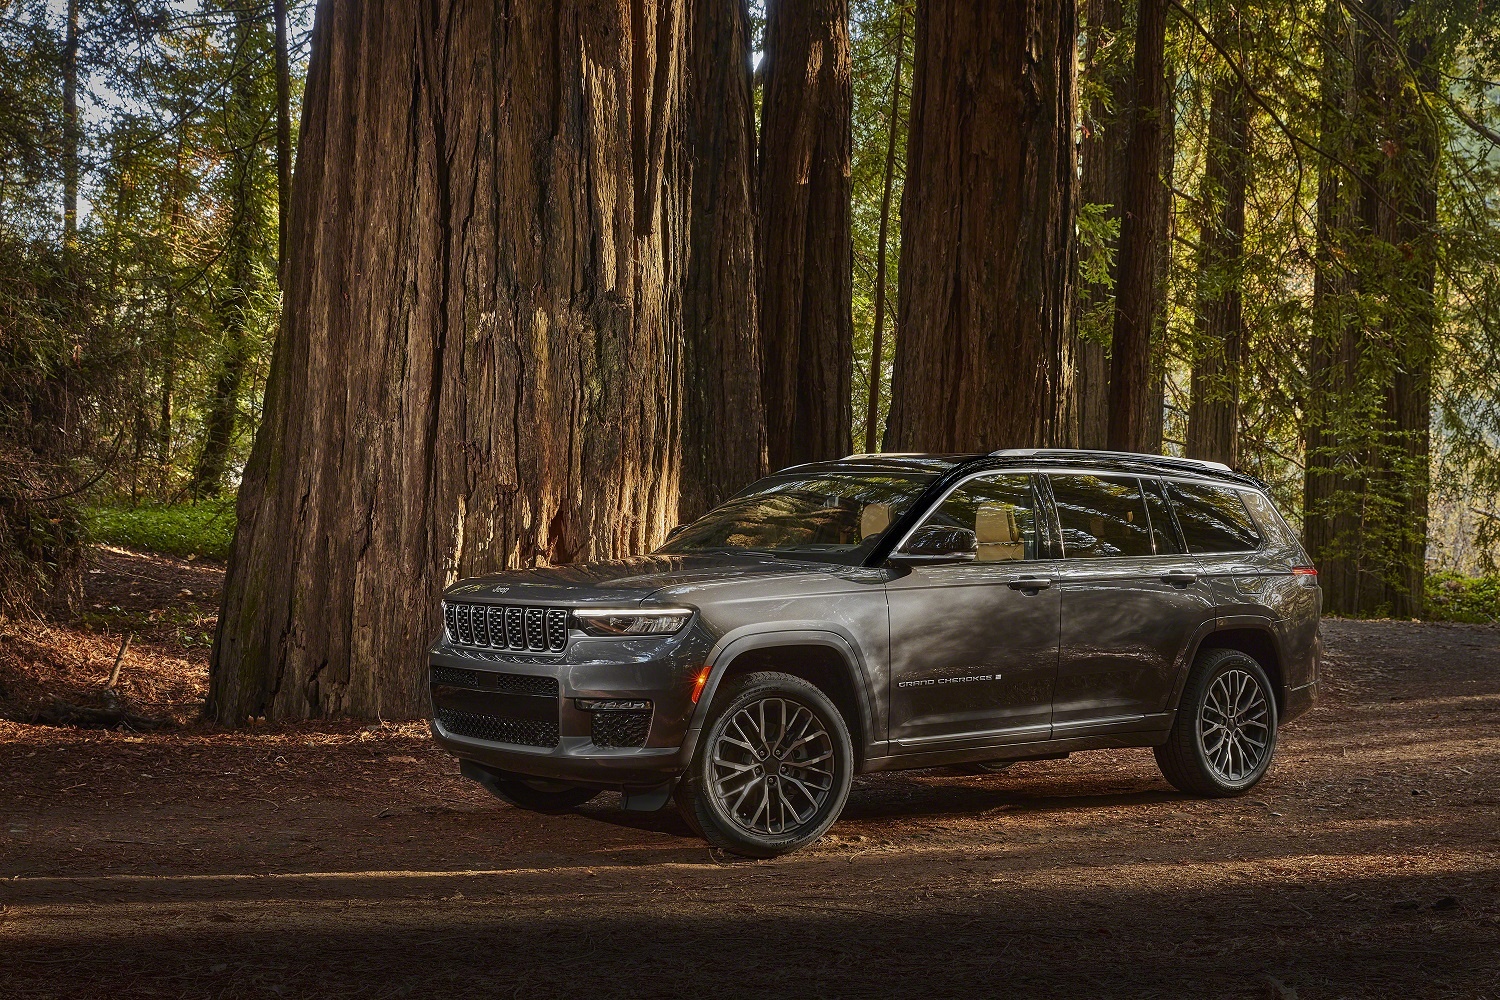 All-new 2021 Jeep® Grand Cherokee Breaks New Ground in the SUV Segment